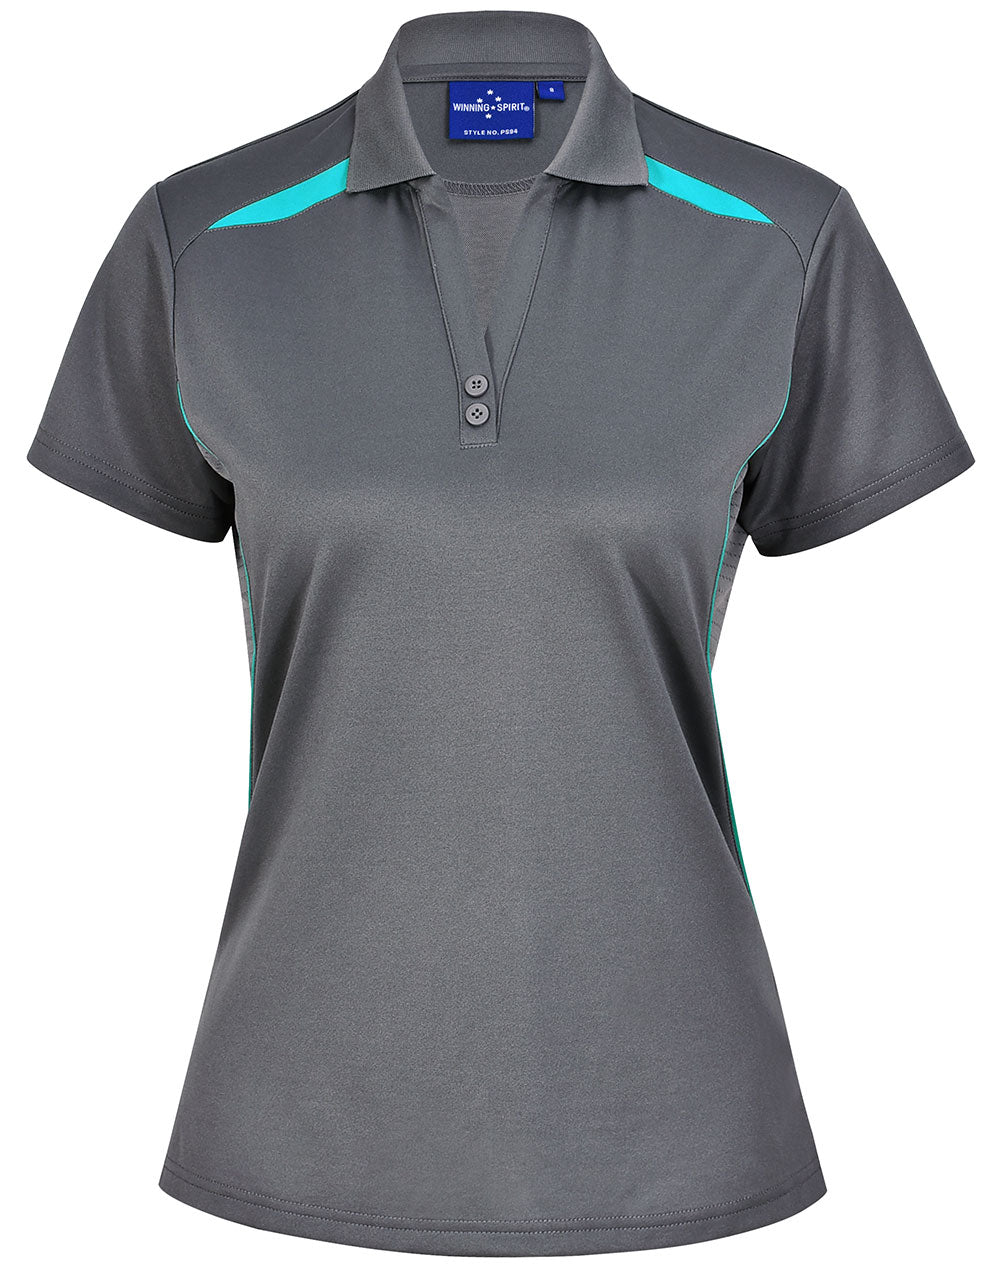 Winning Spirit Women's Sustainable Poly-Cotton Contrast Polo PS94 Casual Wear Winning Spirit Ash/Teal 8 